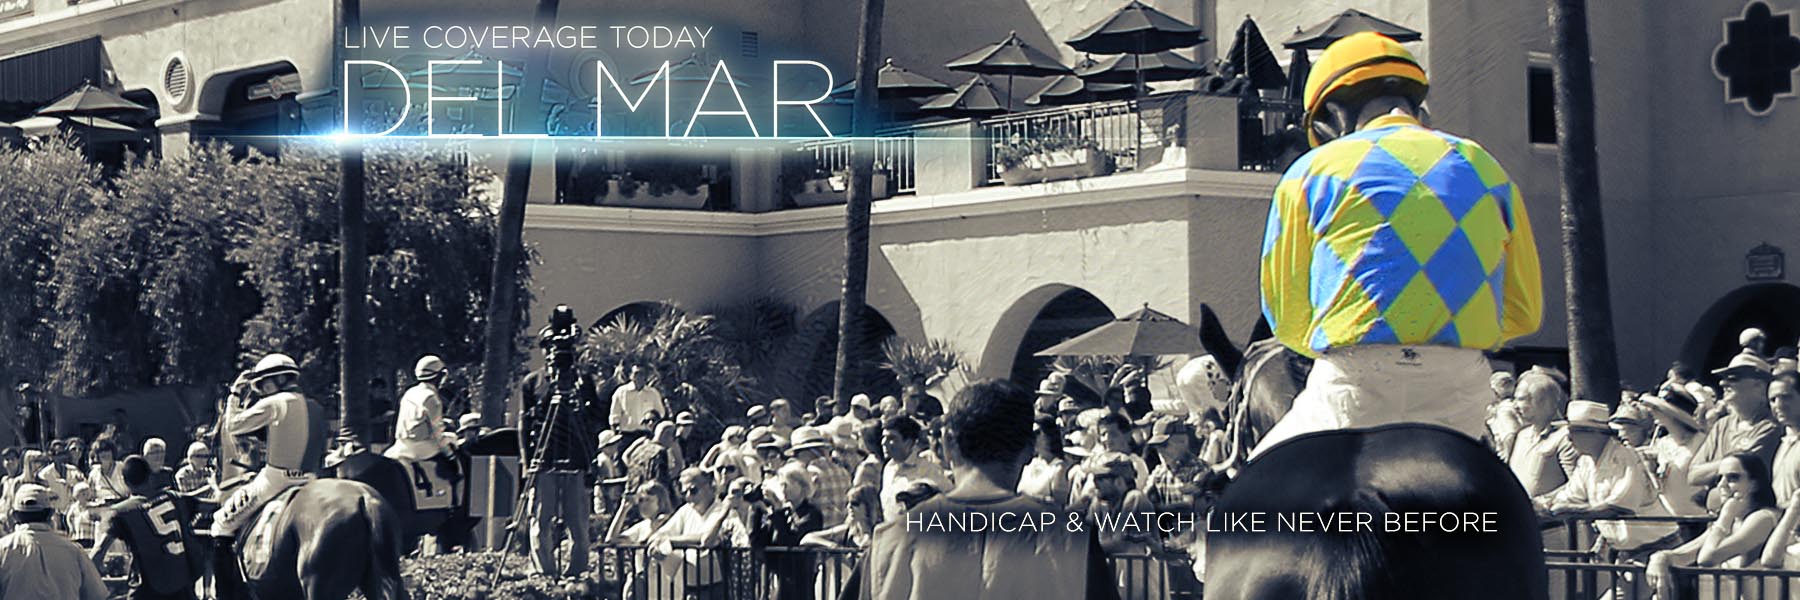 Jeff Siegel’s Blog: Del Mar Analysis & Wagering Strategies for Sunday, July 25, 2021